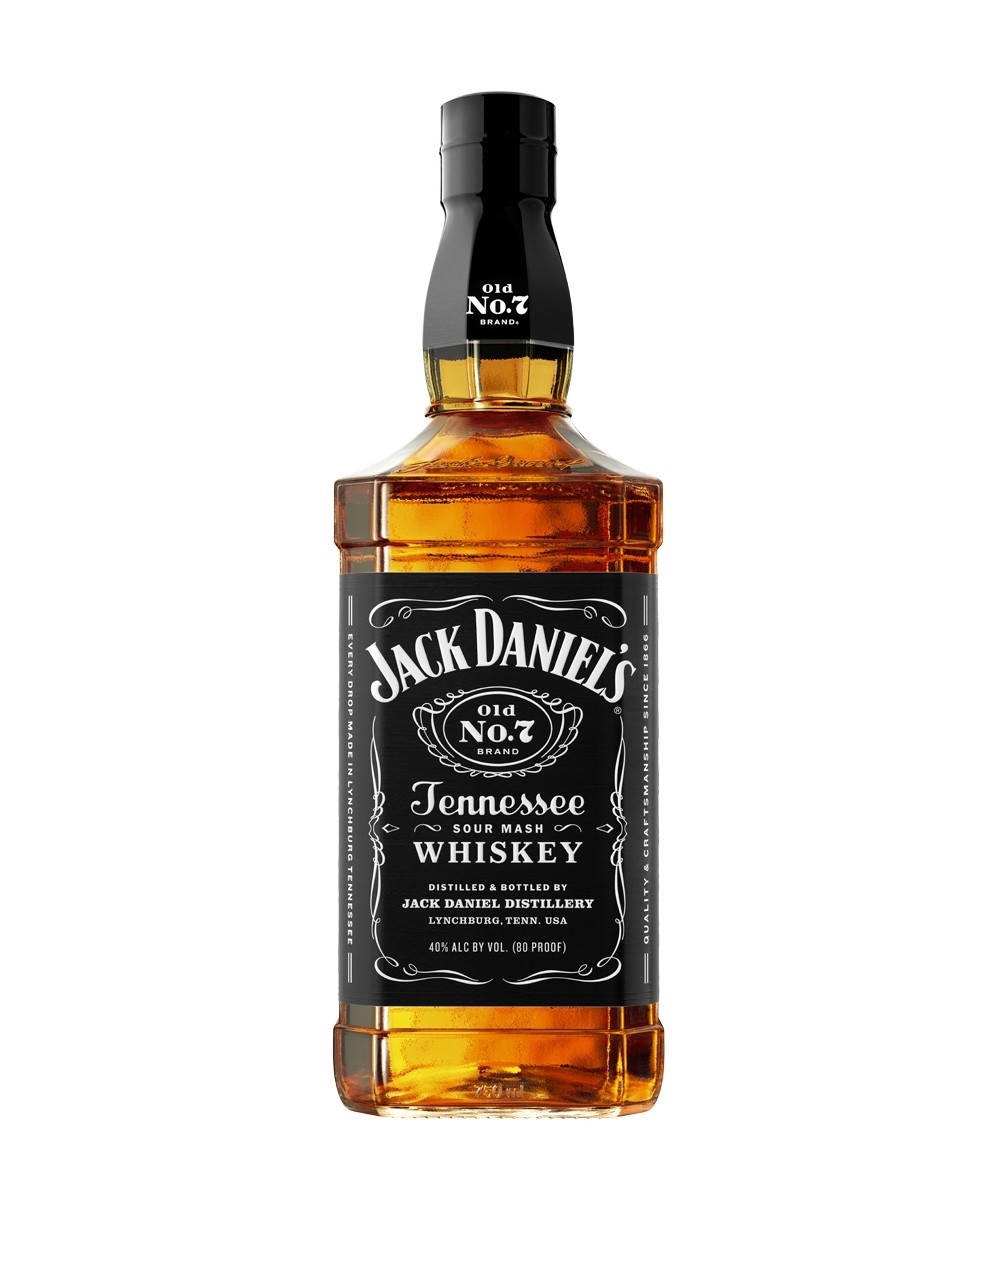 Jack Daniel's Tennessee Whiskey | Buy Online or Send as a